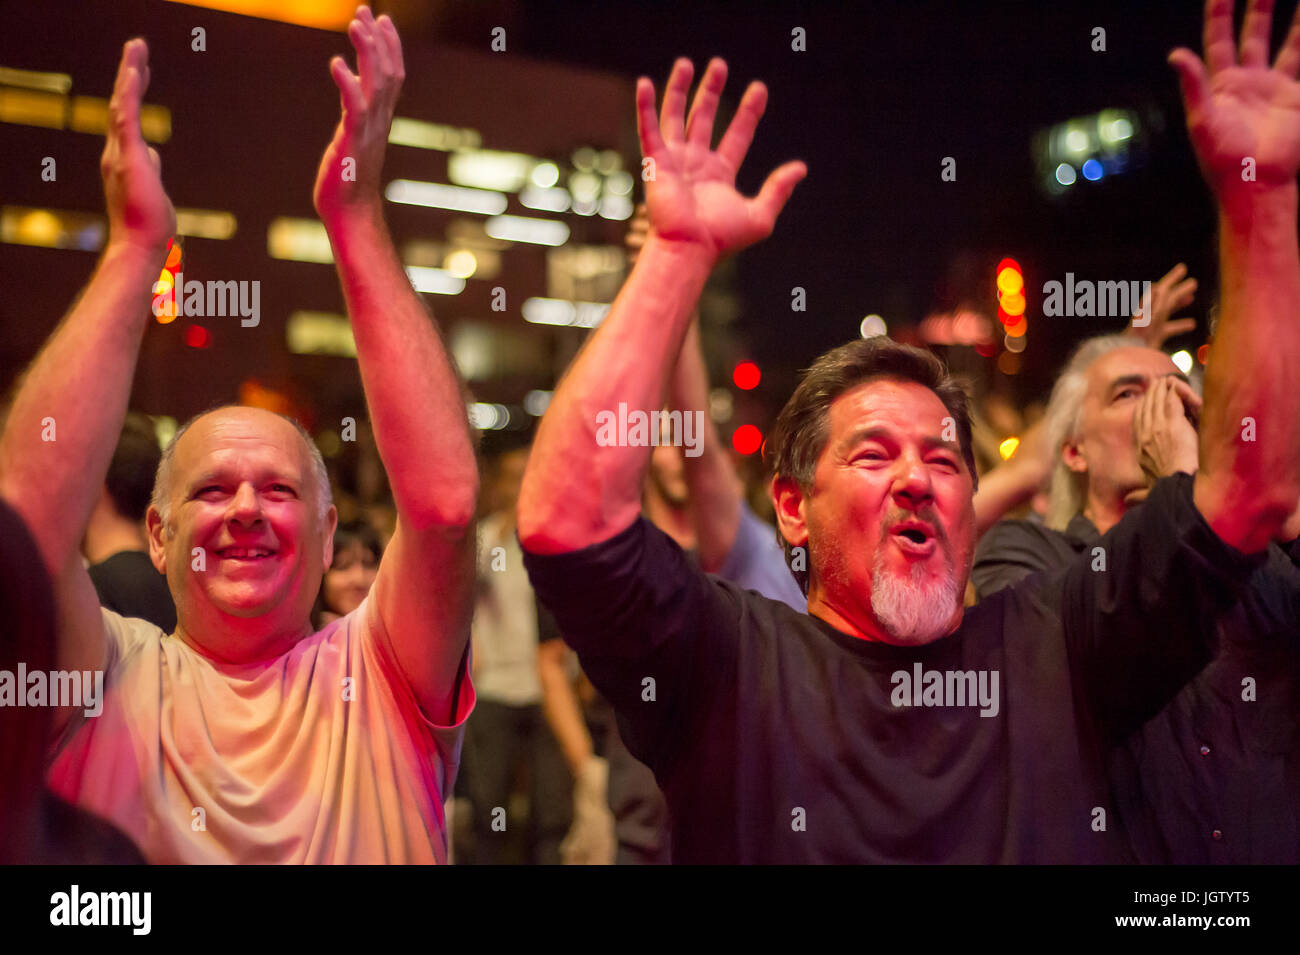 Montreal, 4 July 2017: Men cheering and smiling at the end of a concert at Montreal Jazz Festival Stock Photo